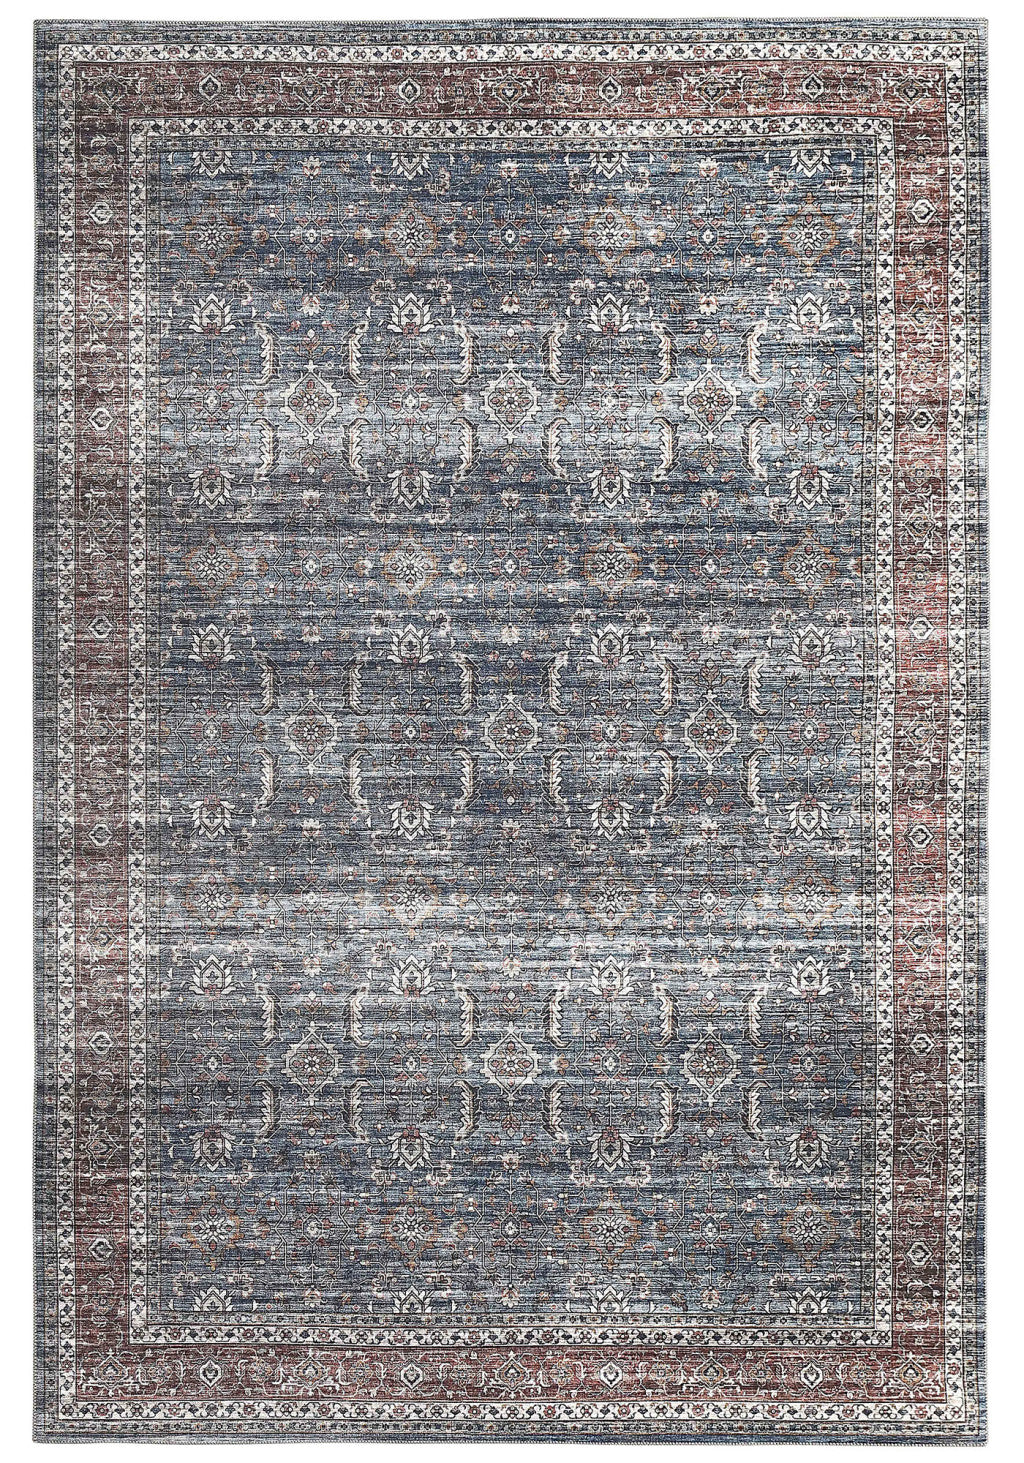 4' X 6' Blue Oriental Distressed Stain Resistant Area Rug